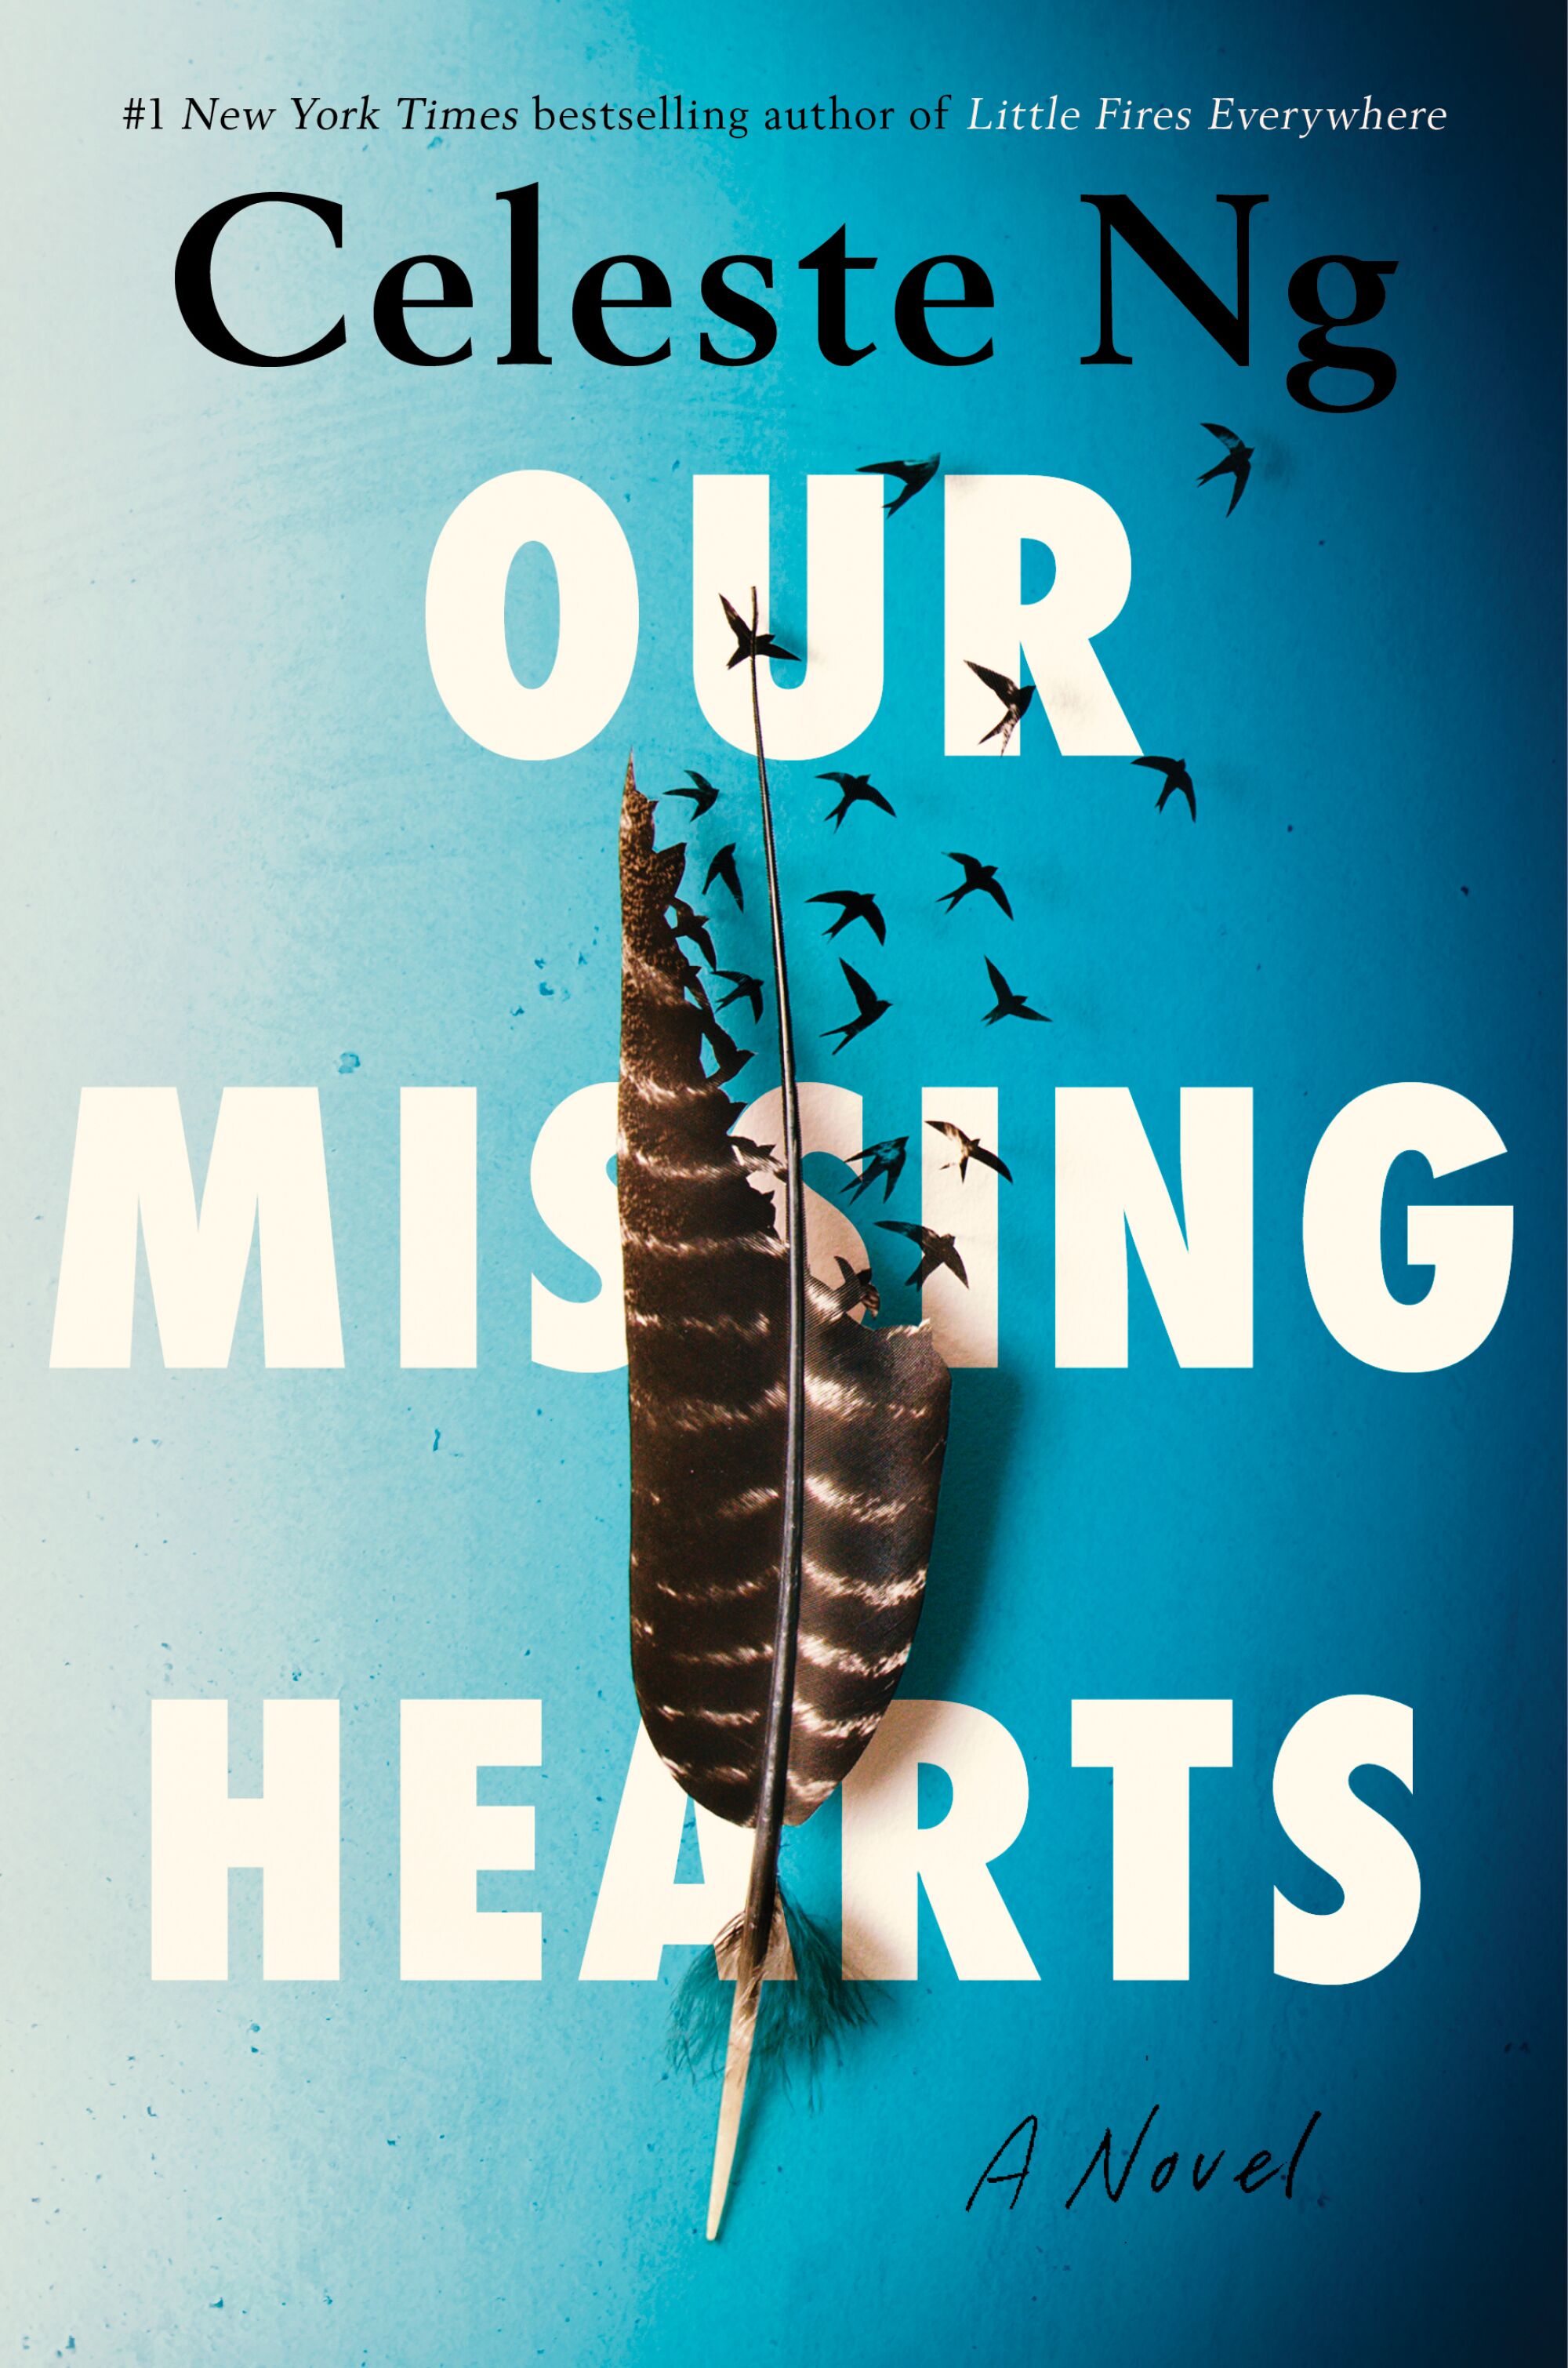 Feather over the words on cover of "Our Missing Hearts" by Celeste Ng